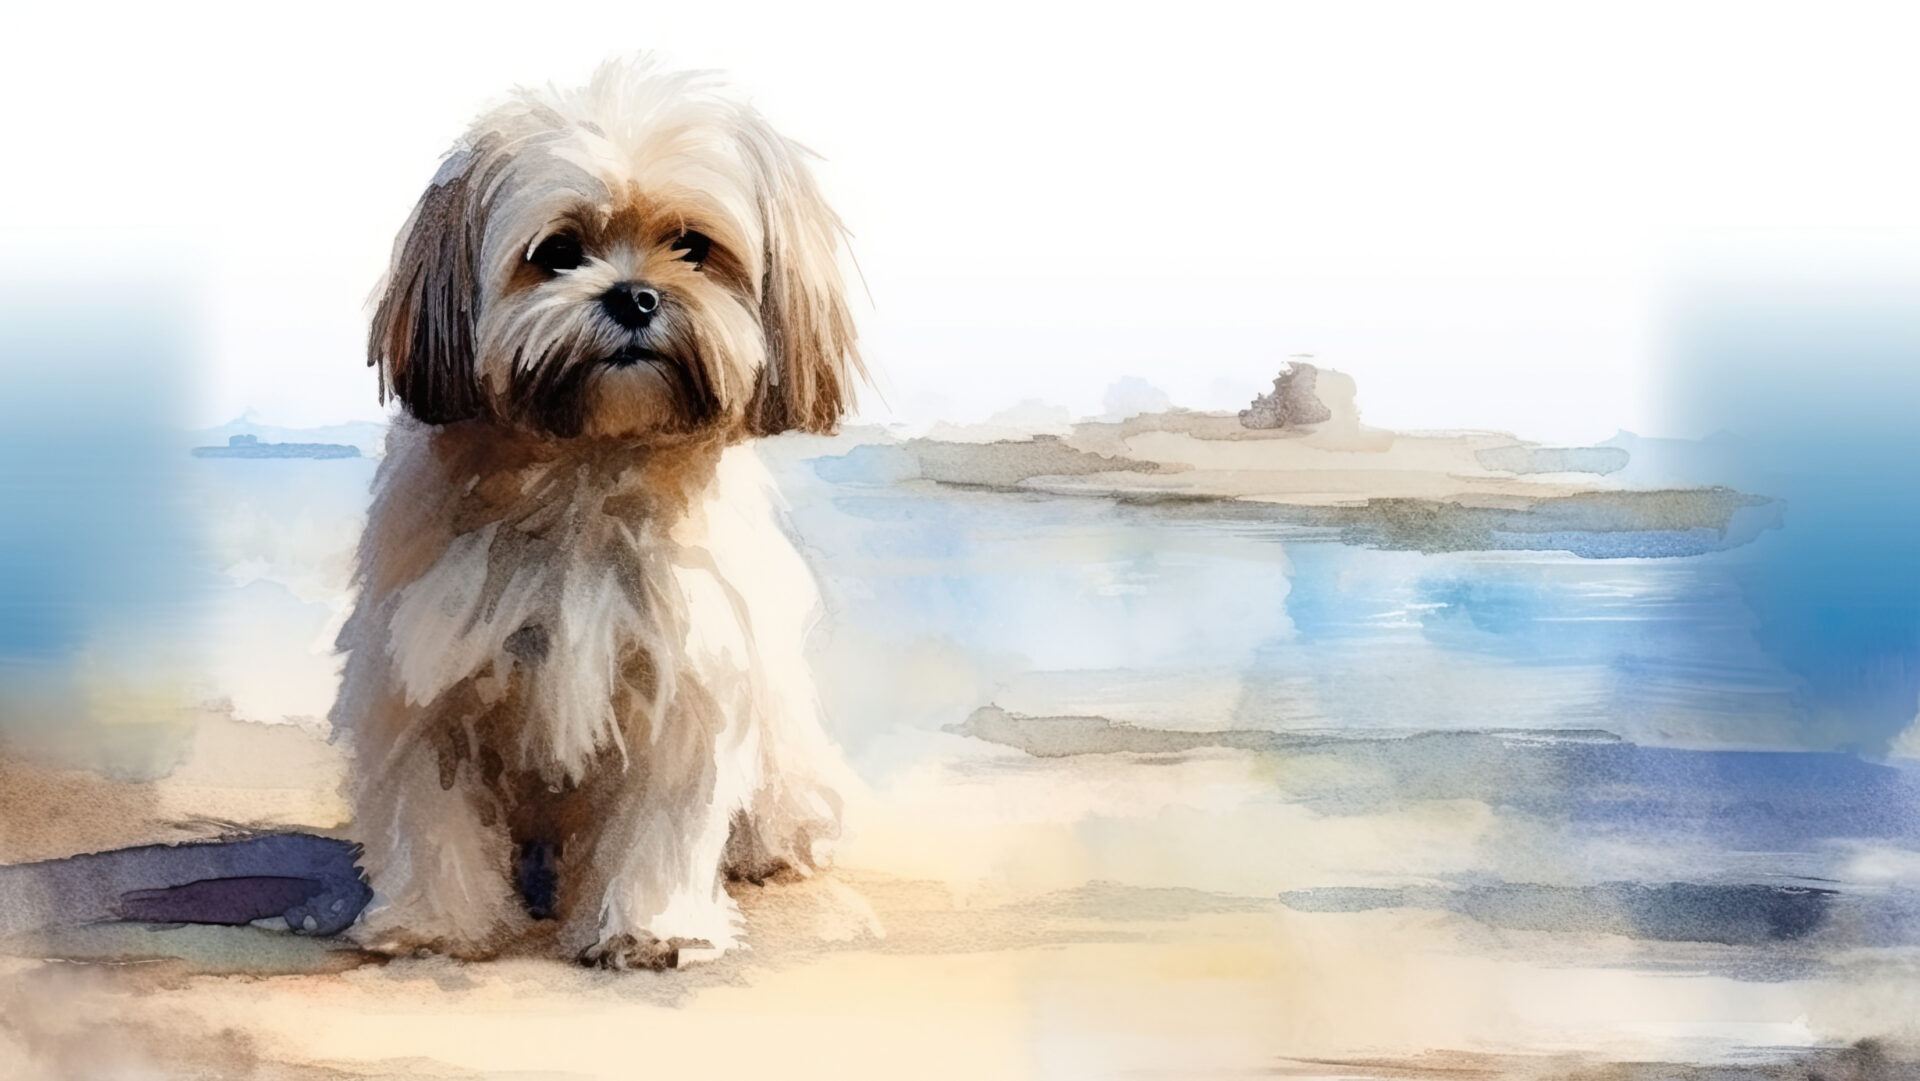 Poppy the Lhasa as a watercolour painting on the beach